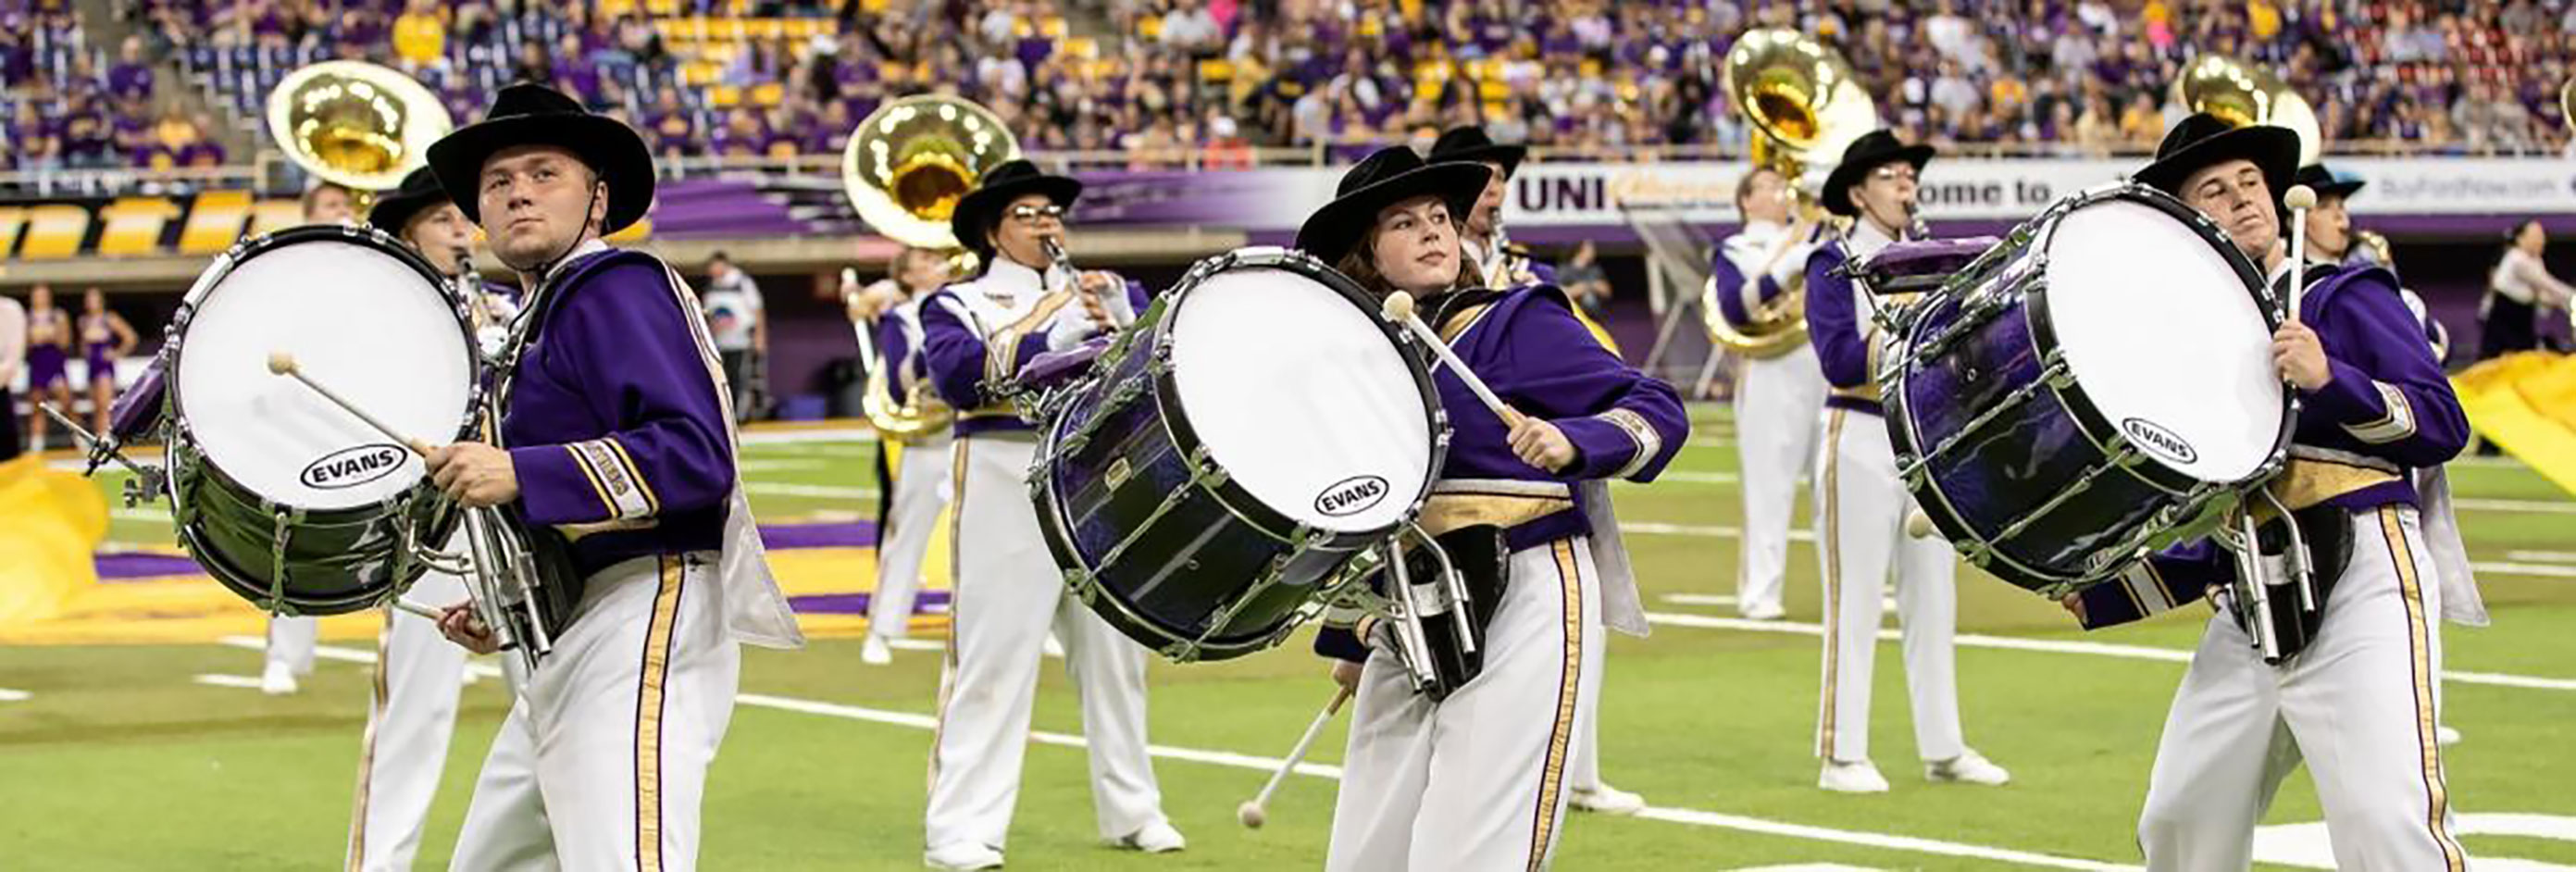 Students playing drums on a football field.